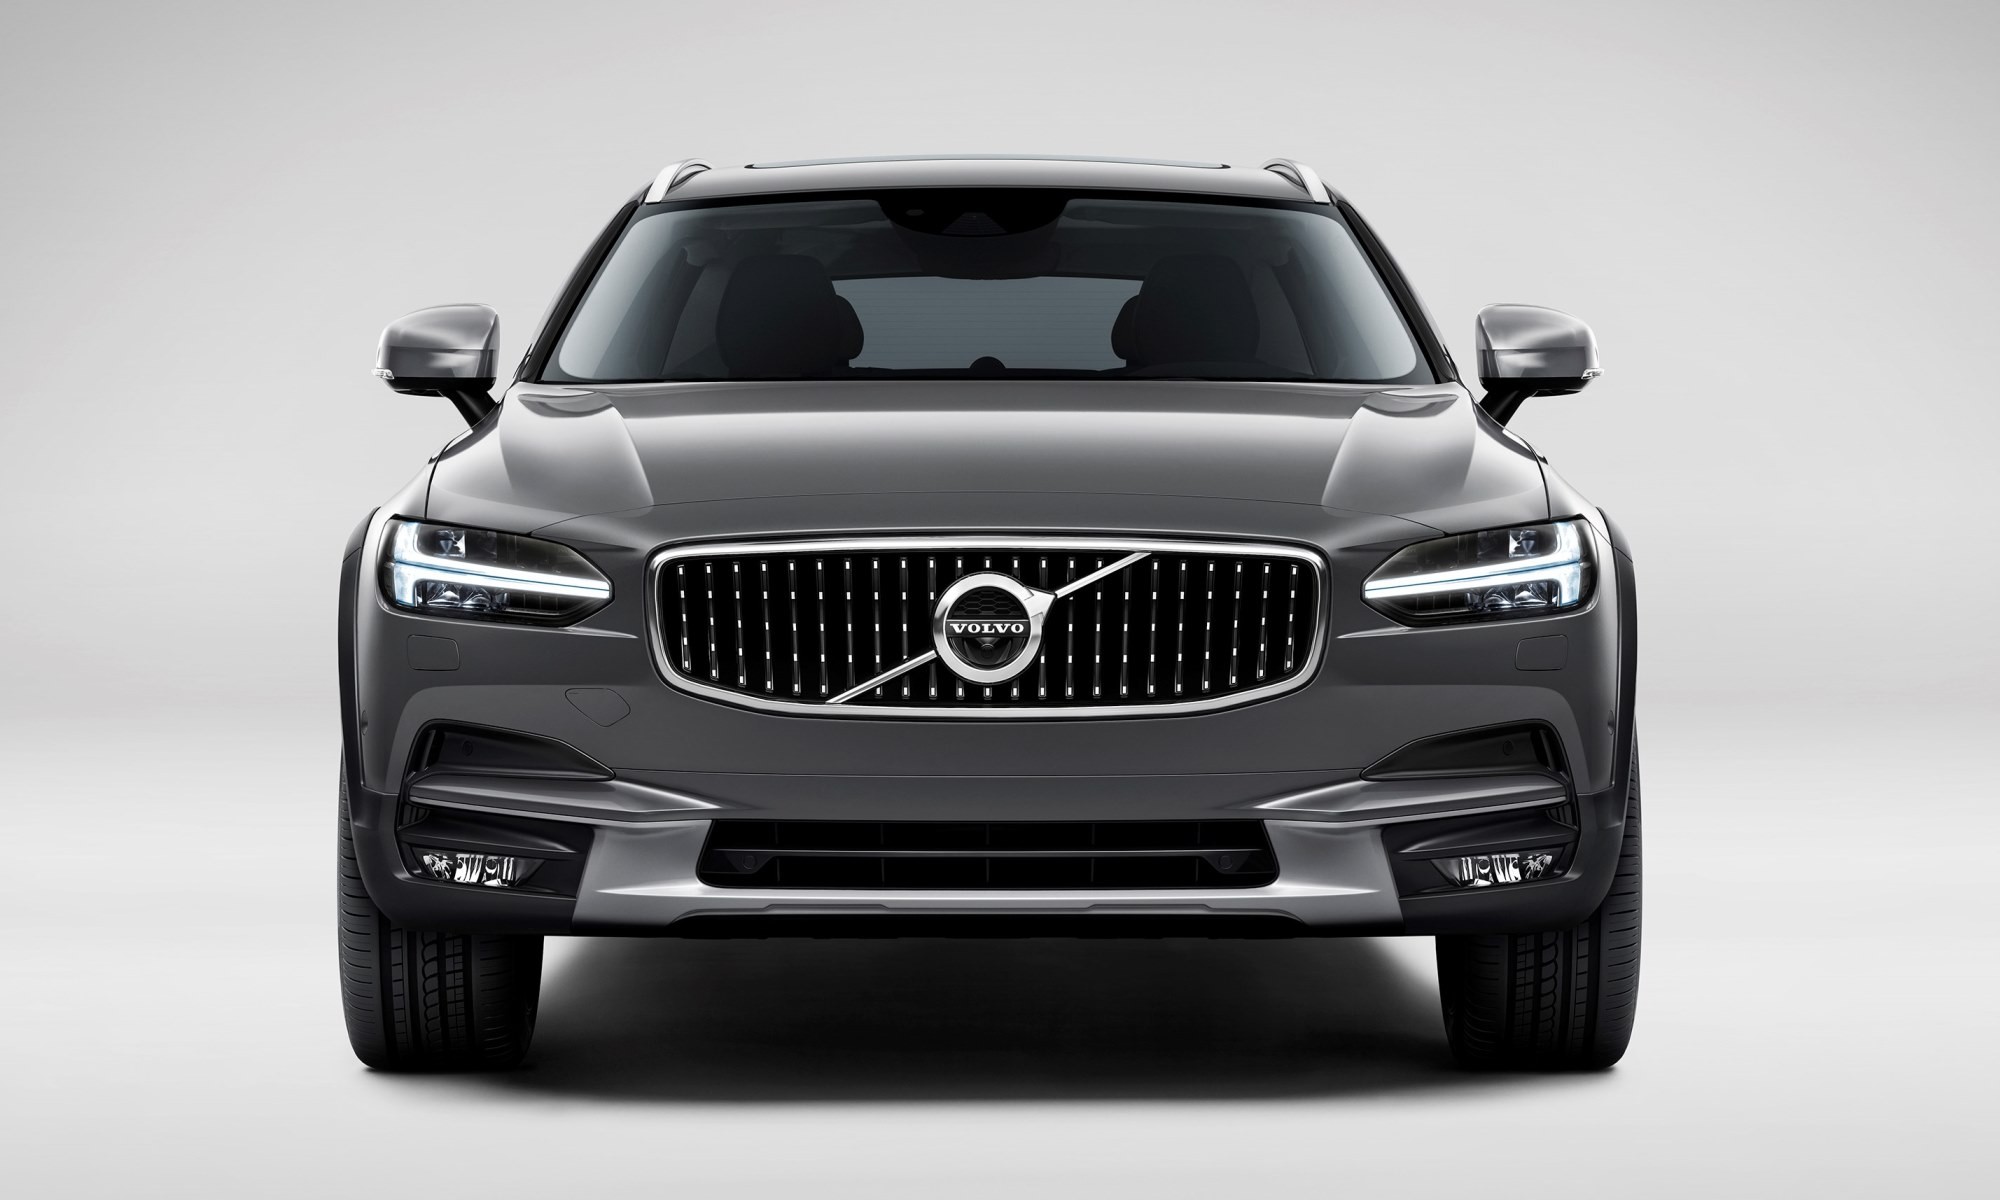 We recently sampled the Volvo V90 Cross Country